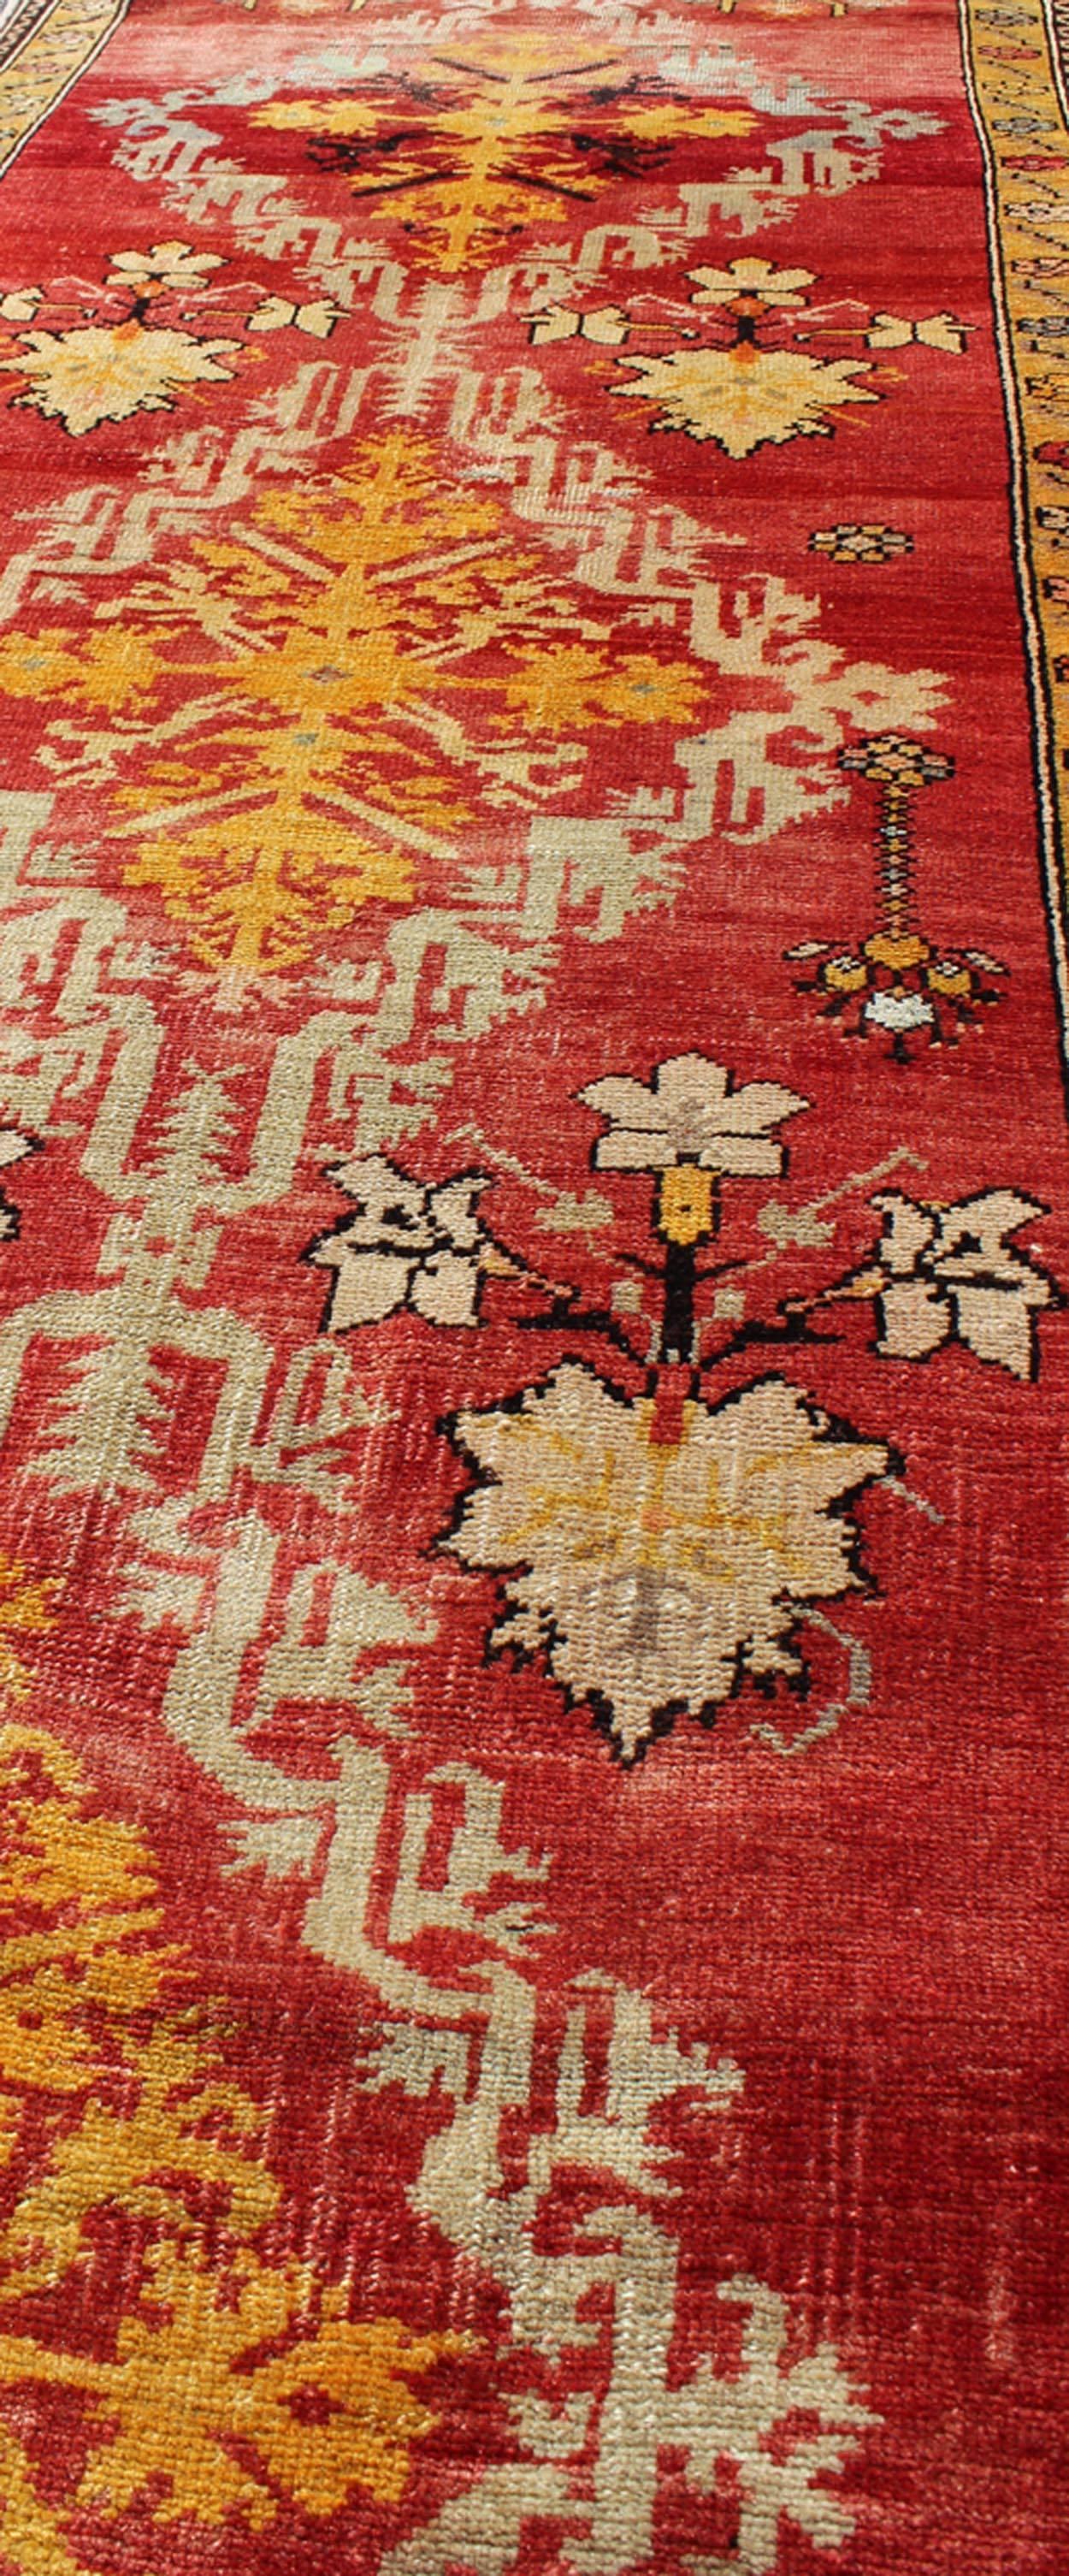 Wool Antique Turkish Oushak Runner with Tribal Medallions in Red, Orange, and Yellow For Sale